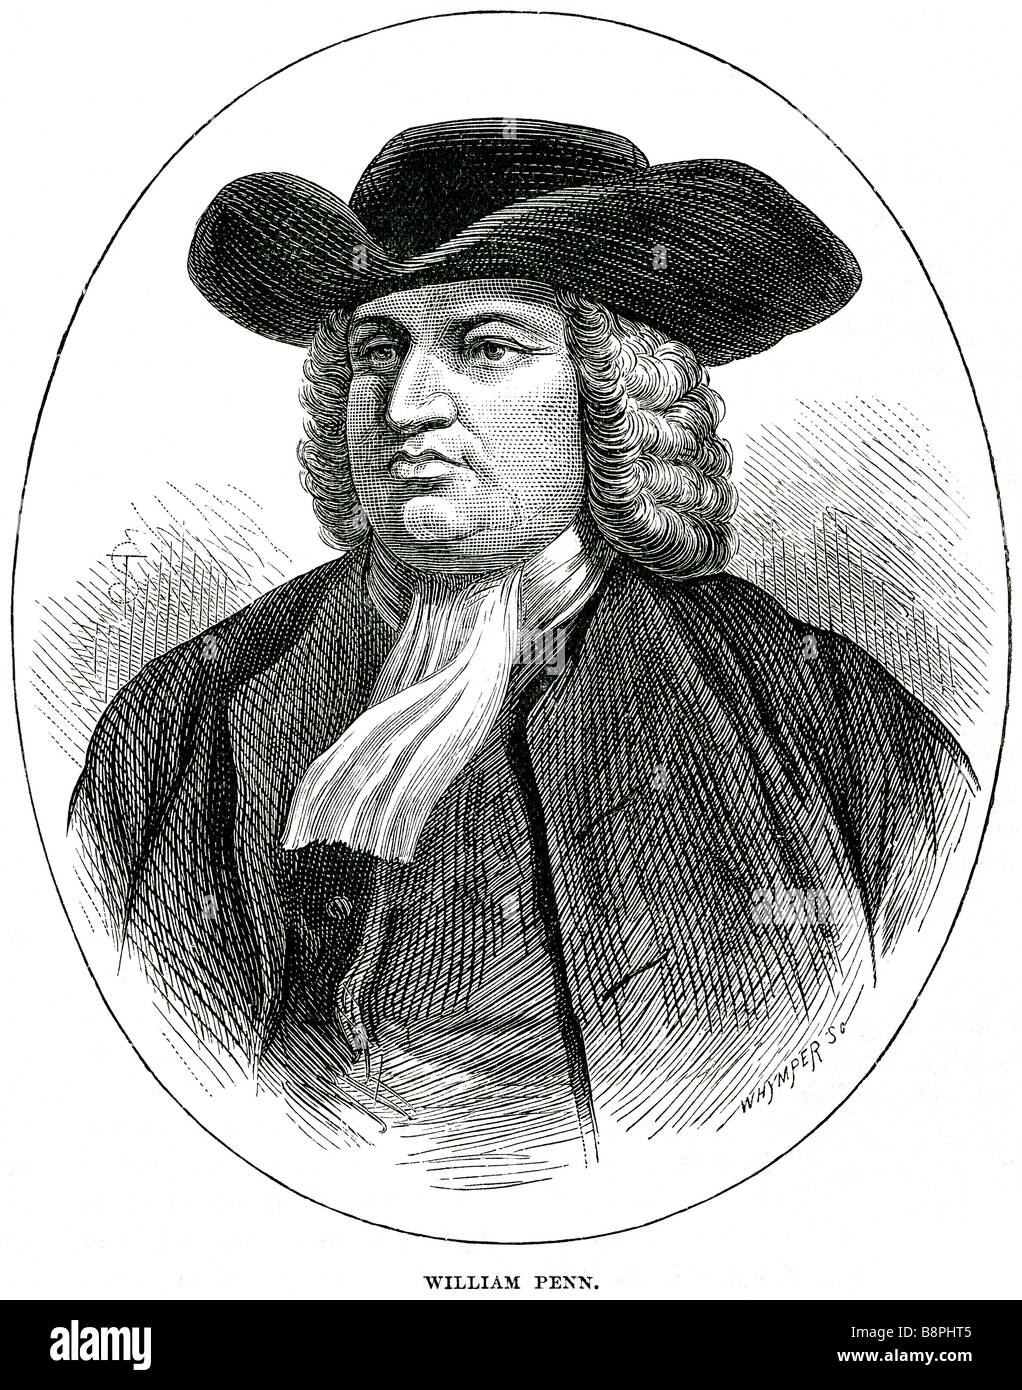 William Penn (October 14, 1644 – July 30, 1718) was founder and "Absolute Proprietor" of the Province of Pennsylvania, the Engli Stock Photo